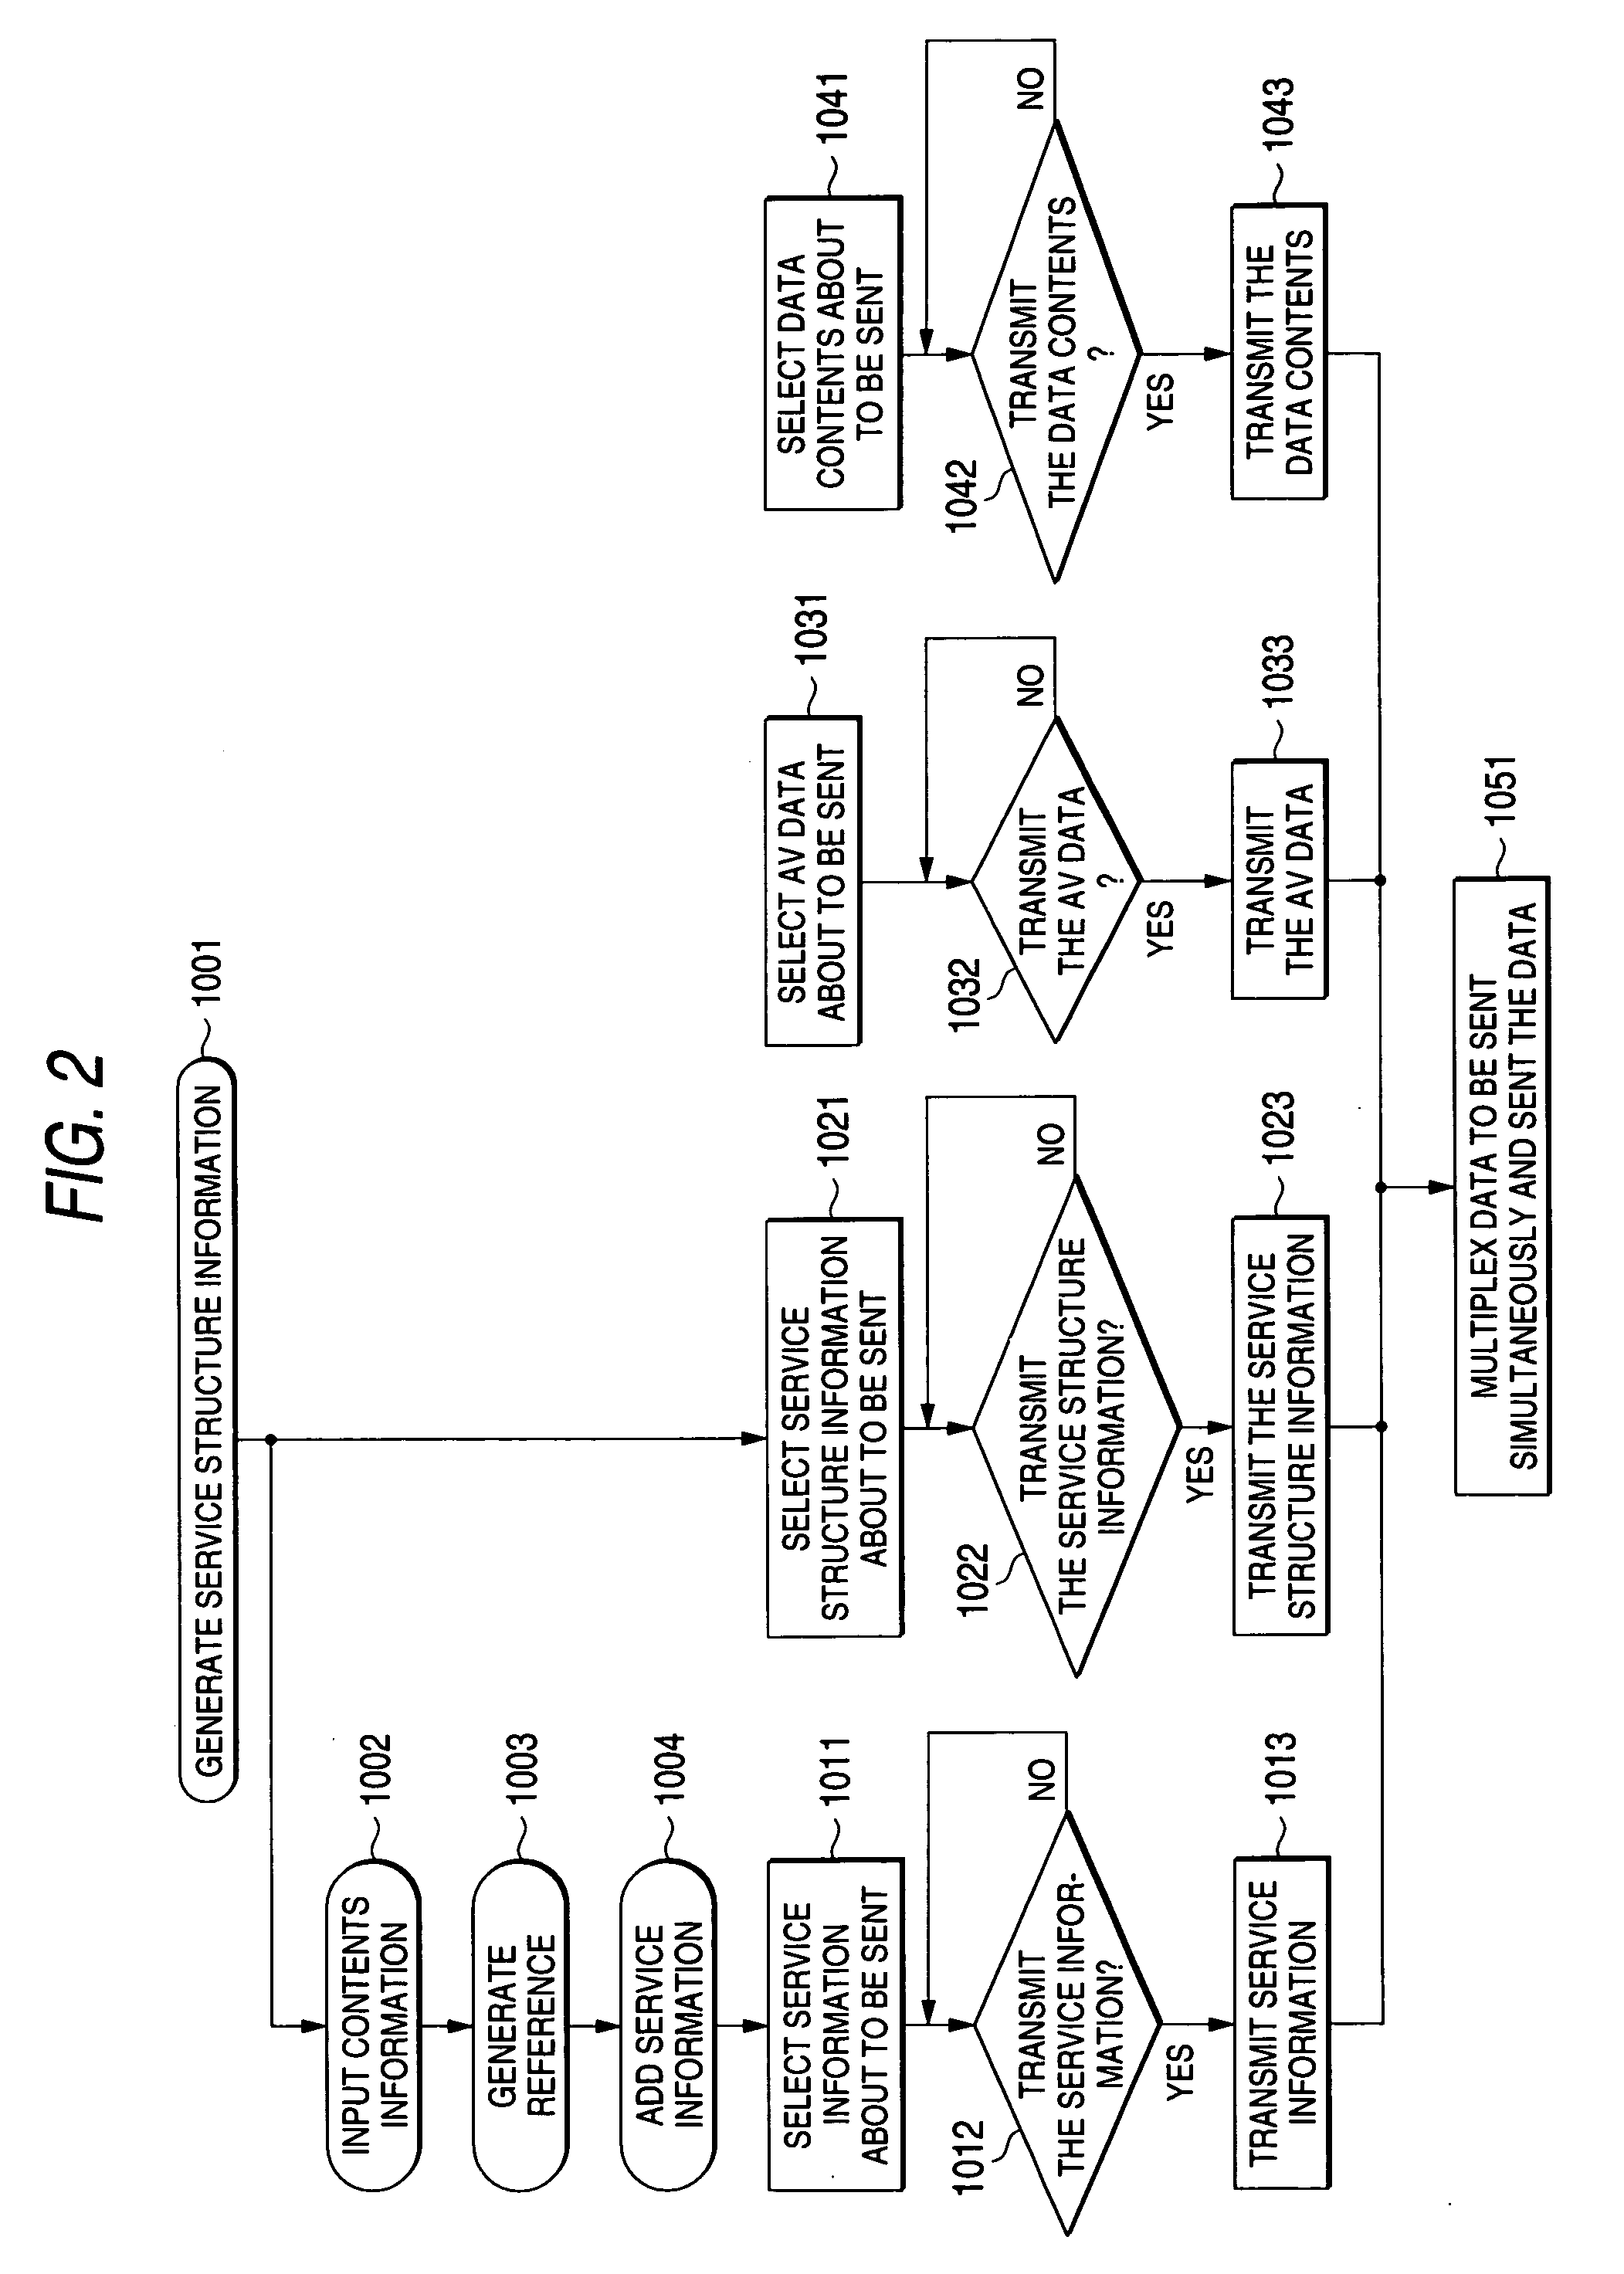 Storage-type broadcast system, transmitter and receiver